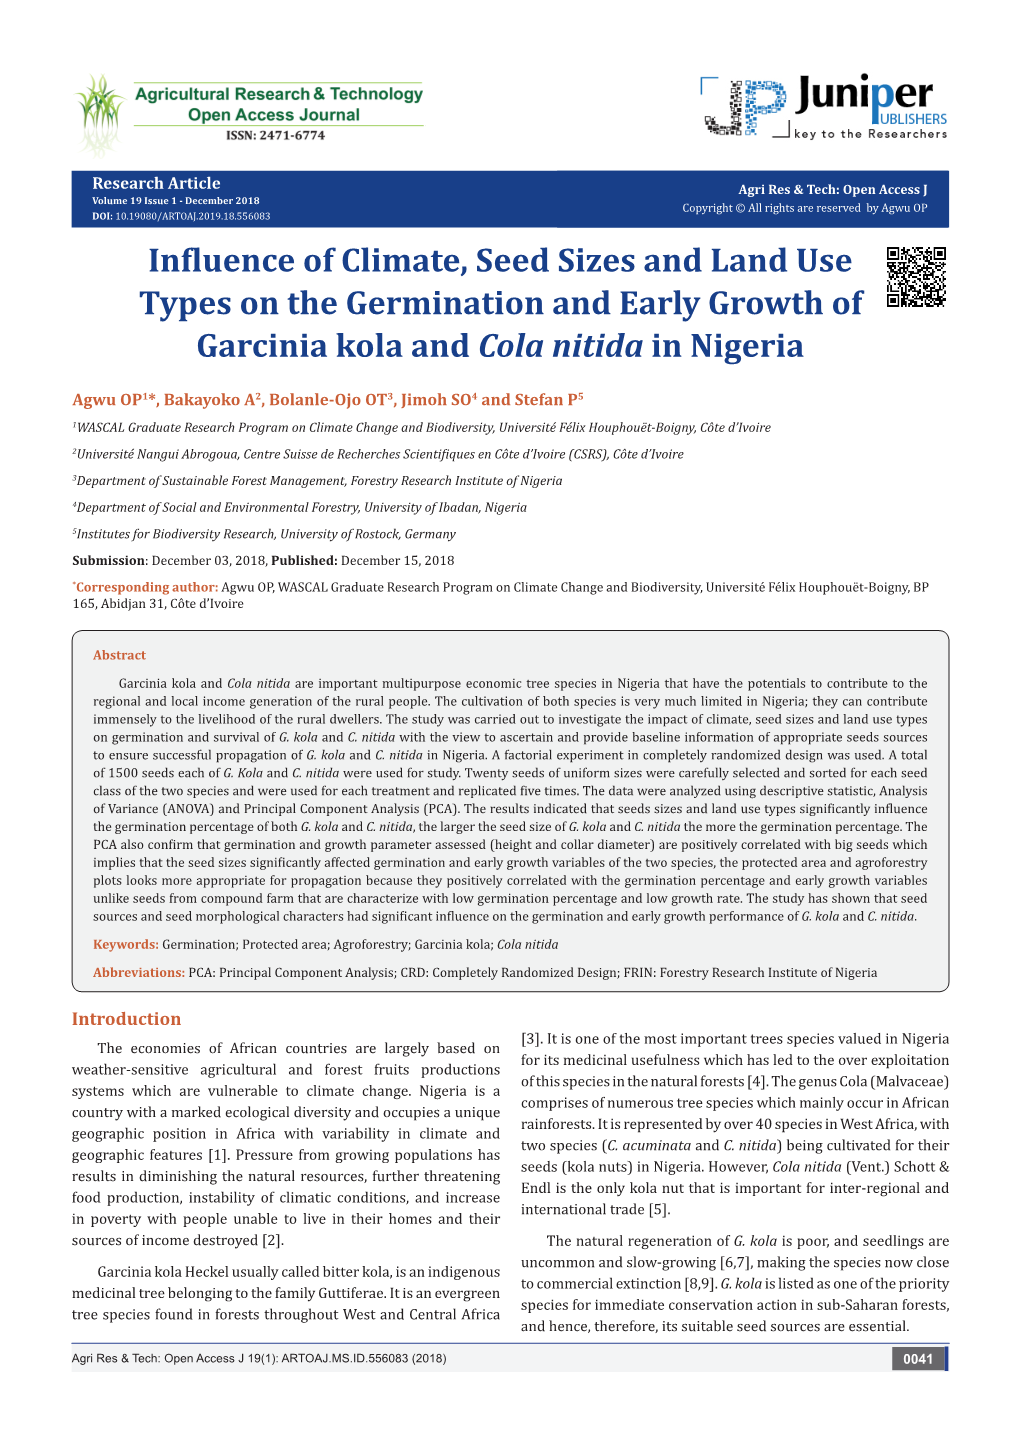 Influence of Climate, Seed Sizes and Land Use Types on the Germination and Early Growth of Garcinia Kola and Cola Nitida in Nigeria